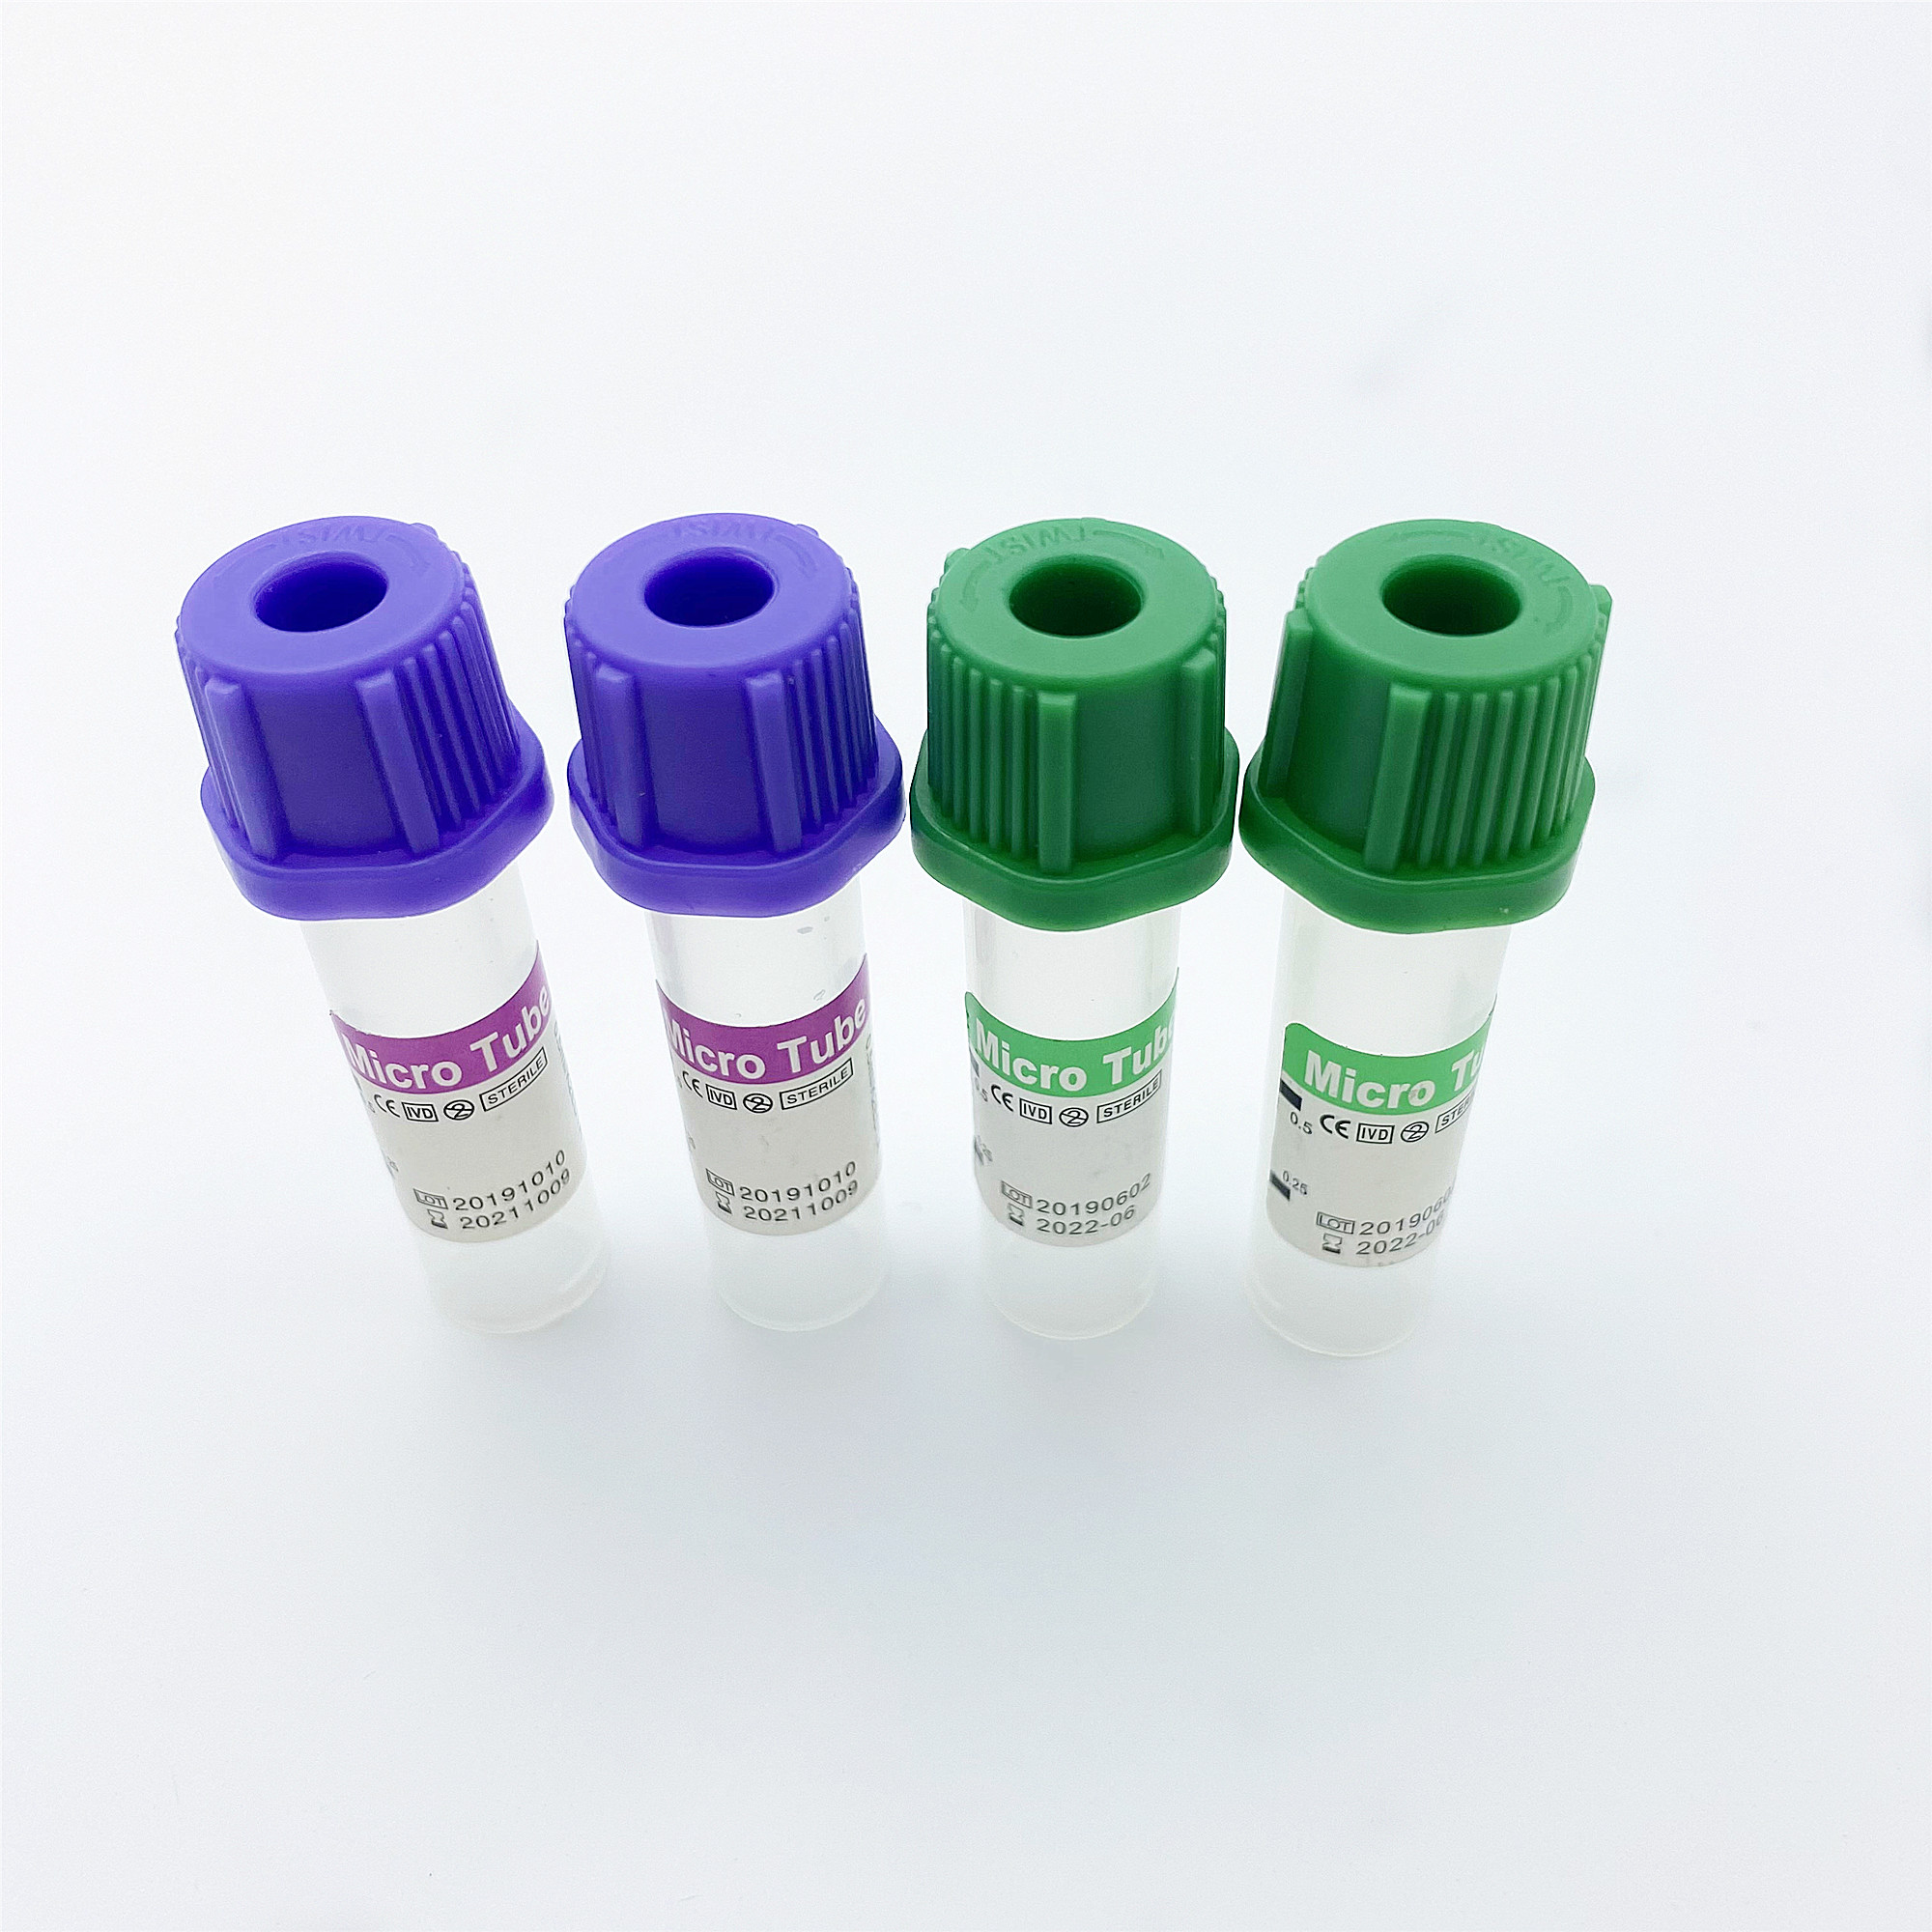 You can purchase 0.2ml Micro Blood Collection Tube PP with the low price from ChaoRan Medical. It is one of the manufacturers and suppliers from China. We have in stock. Welcome to buy high quality, low price, latest selling and discount 0.2ml Micro Blood Collection Tube PP from our factory. We accept be customized. We have obtained ISO and CE Certificates. Our company insists on the policy that "customer is the supreme, prestige promised, quality guaranteed, professional service". We look forward to establish long-term business relationship with oversea distributors for mutual benefit. We can send free samples. If you need the products, we can give you a reasonable quotation and price list.